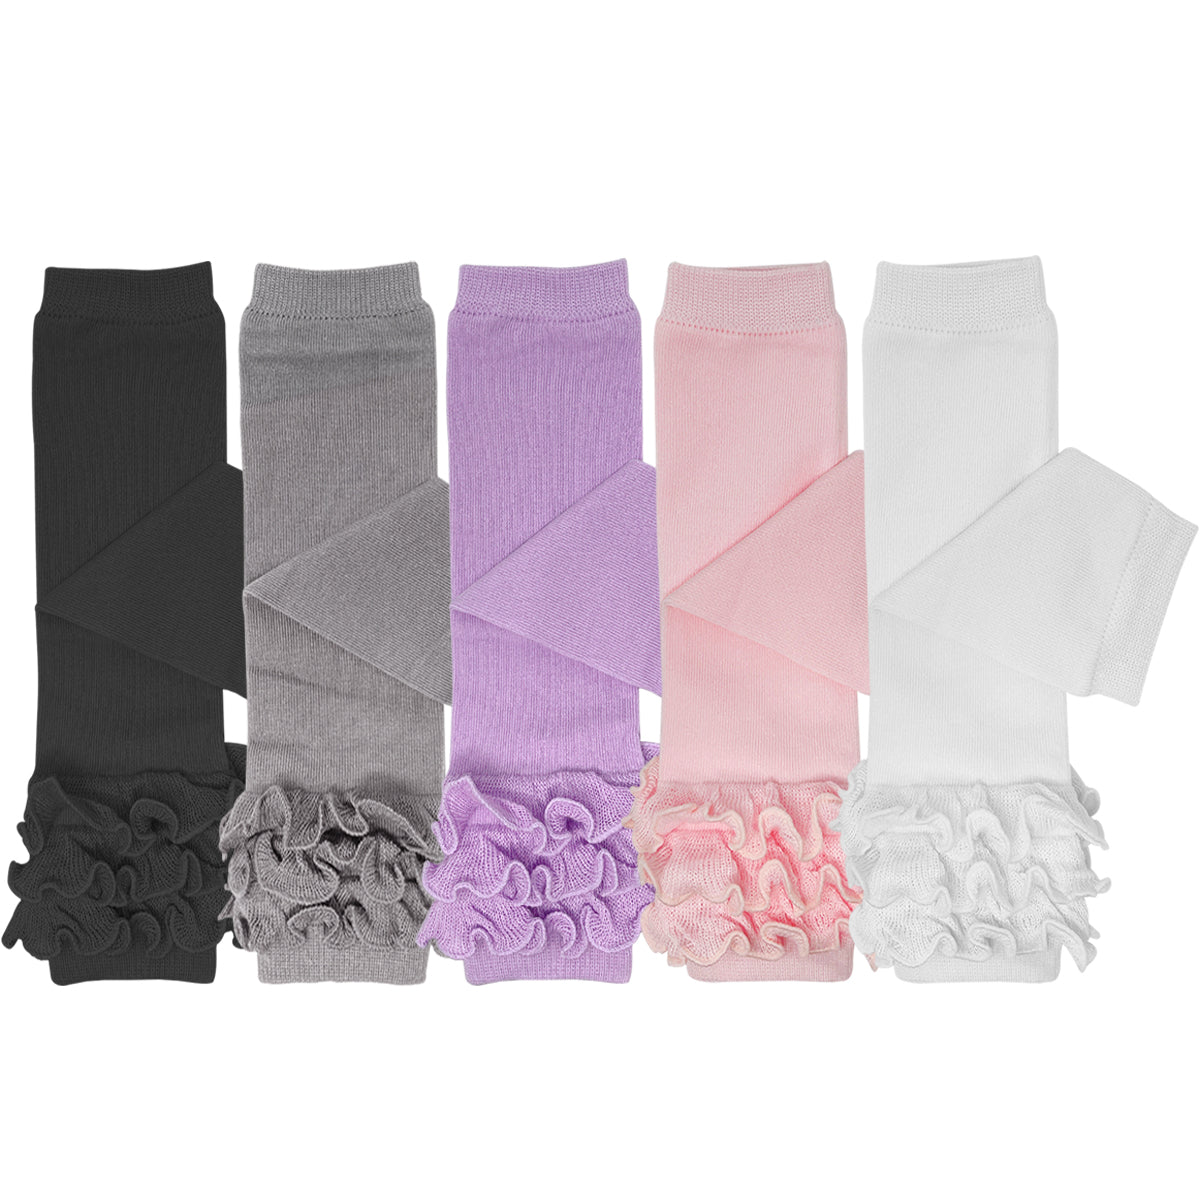 Wrapables Really Ruffly Baby & Toddler Leg Warmers (Set of 5), Black, White, Gray, Pink, Purple